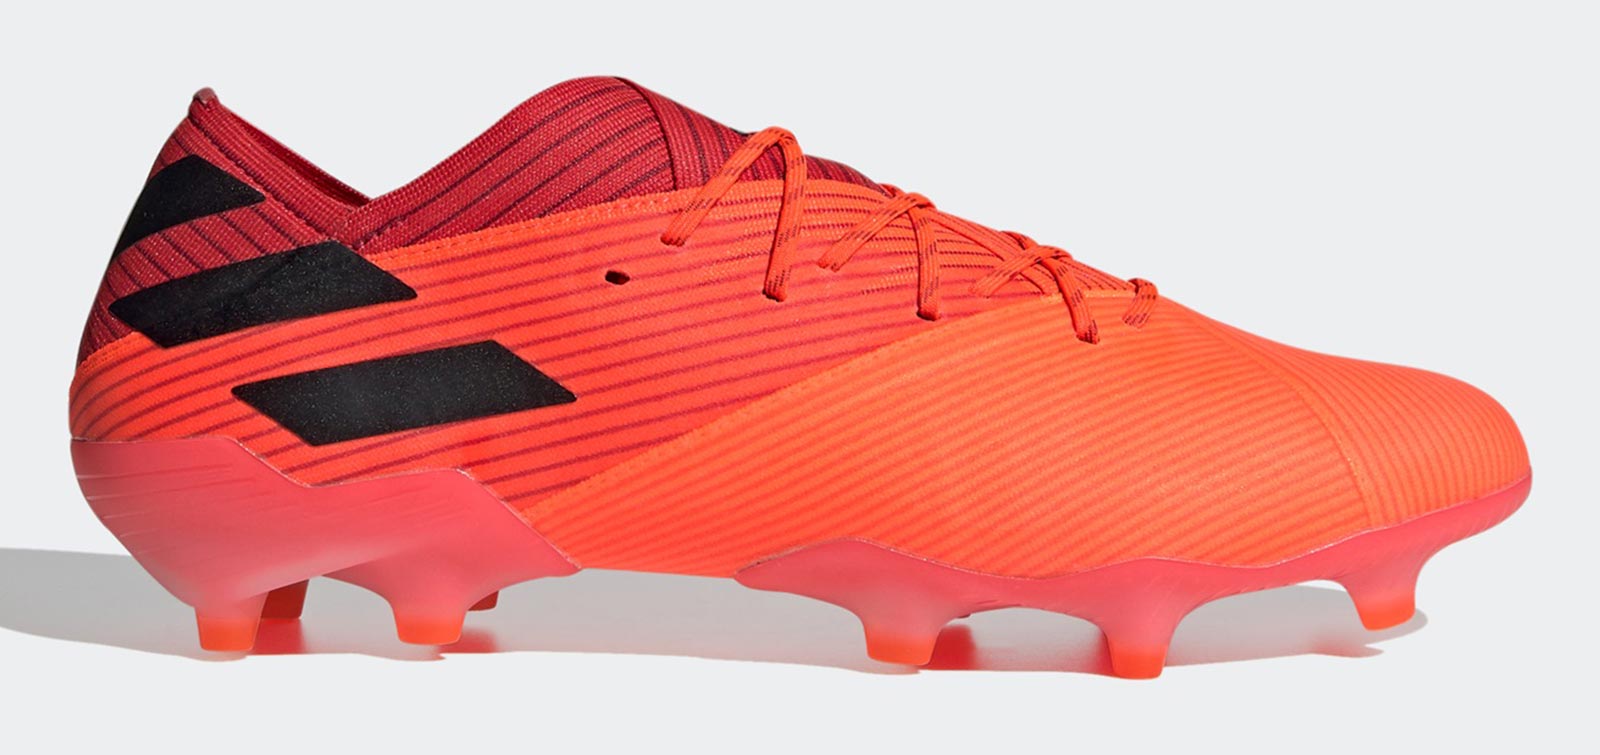 messi new football boots 2020